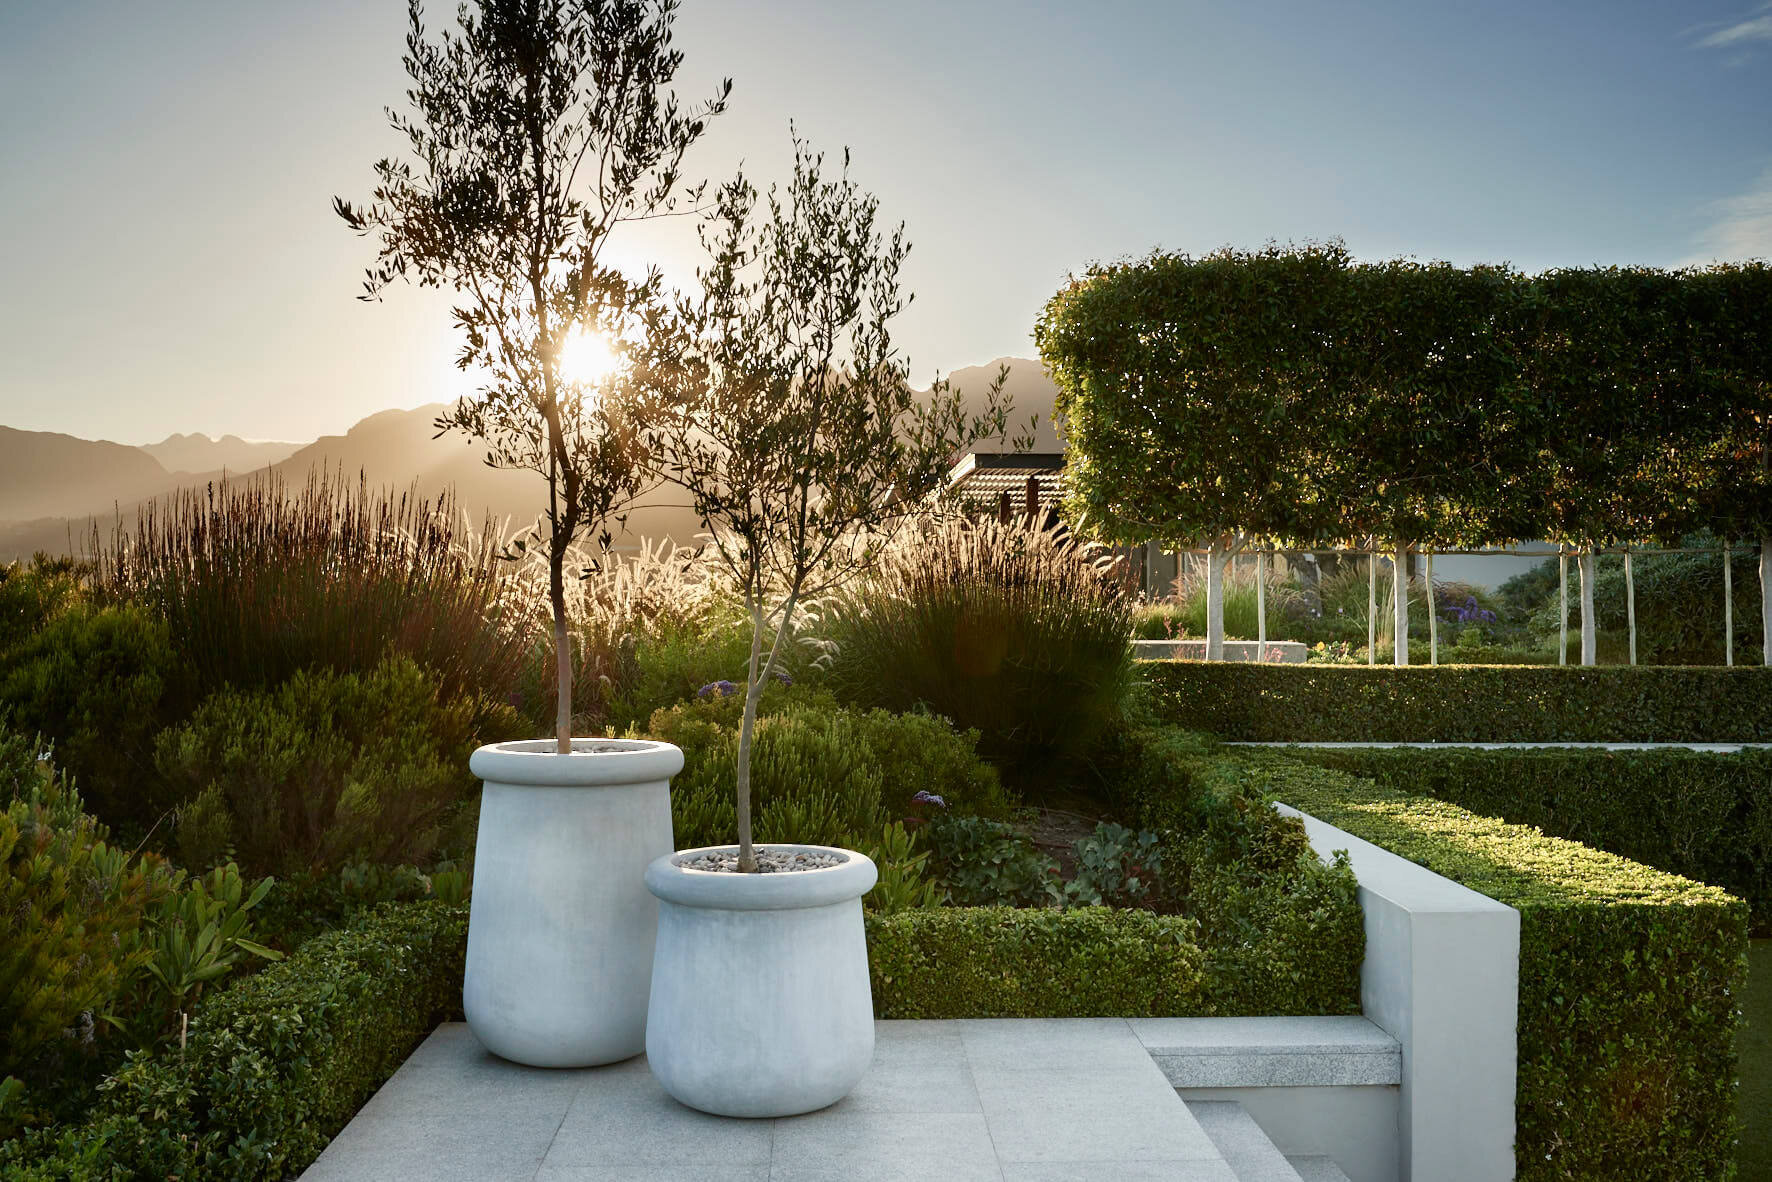 A stylish garden with small trees in white stone planters and sculptured bushes.